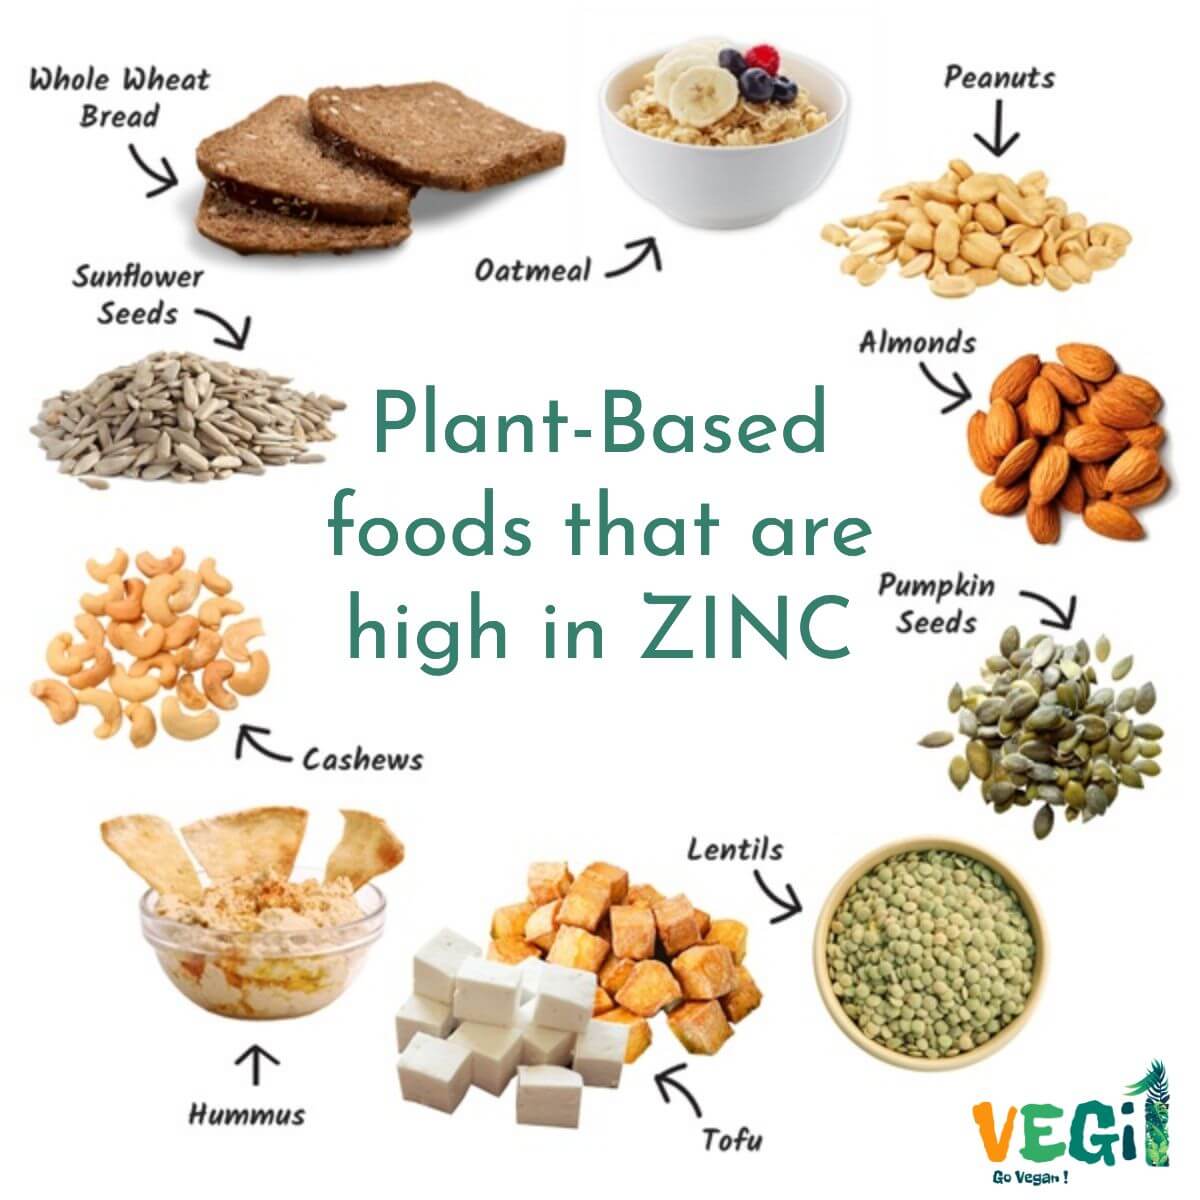 Plant-Based foods that are high in ZINC